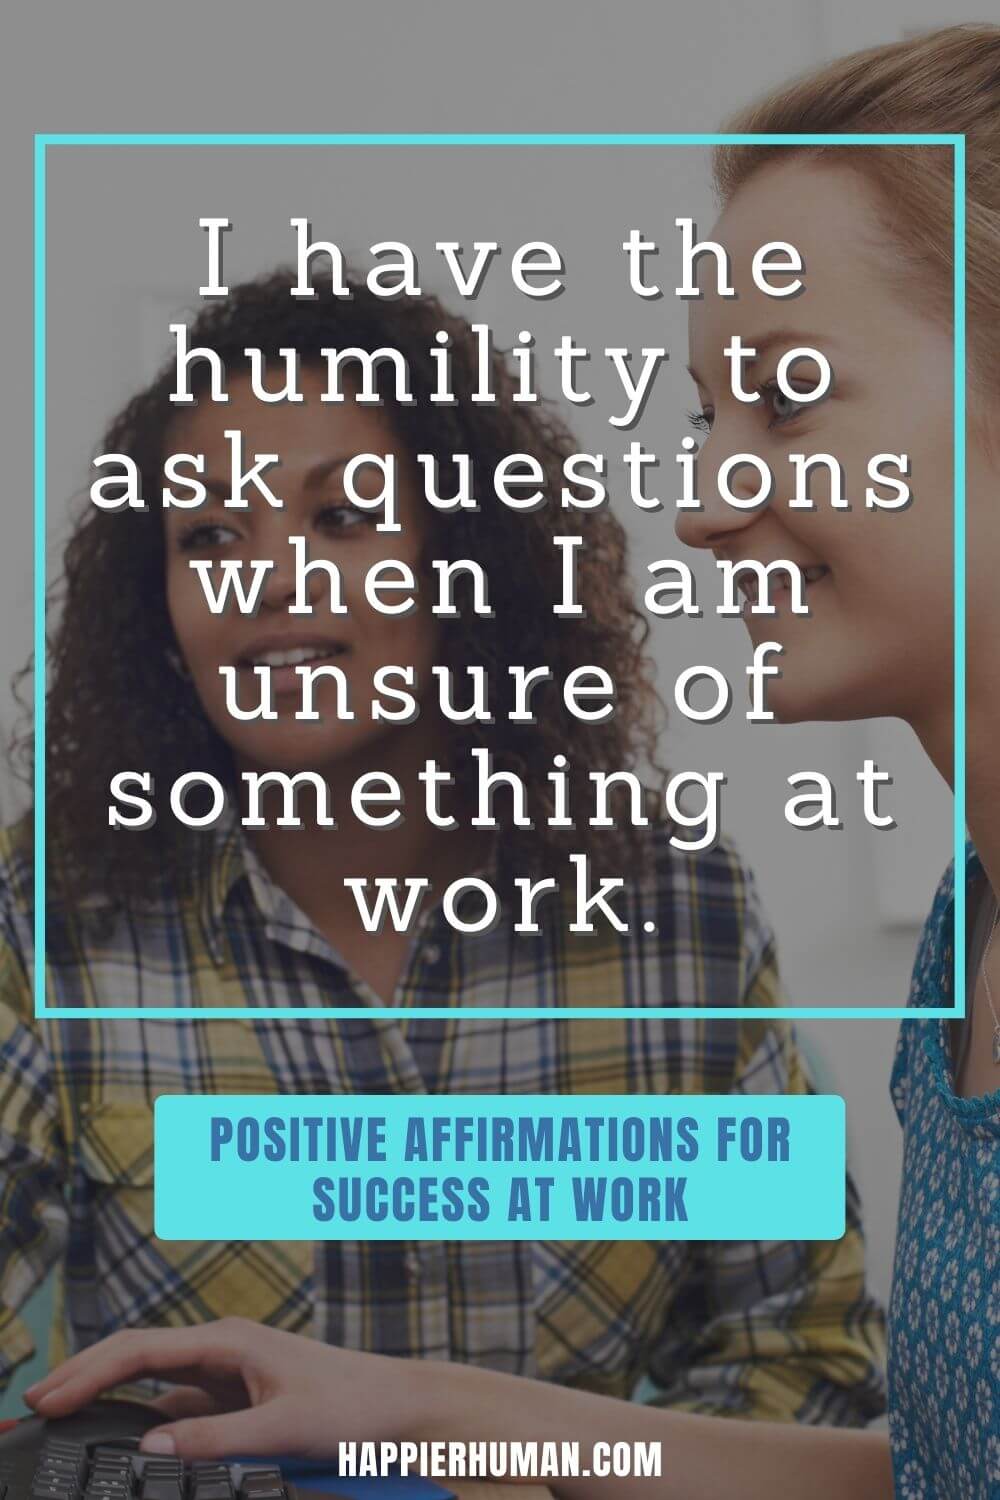 Positive Affirmations for Work - I have the humility to ask questions when I am unsure of something at work. | positive affirmations for work anxiety | funny work affirmations | affirmations for work ethic